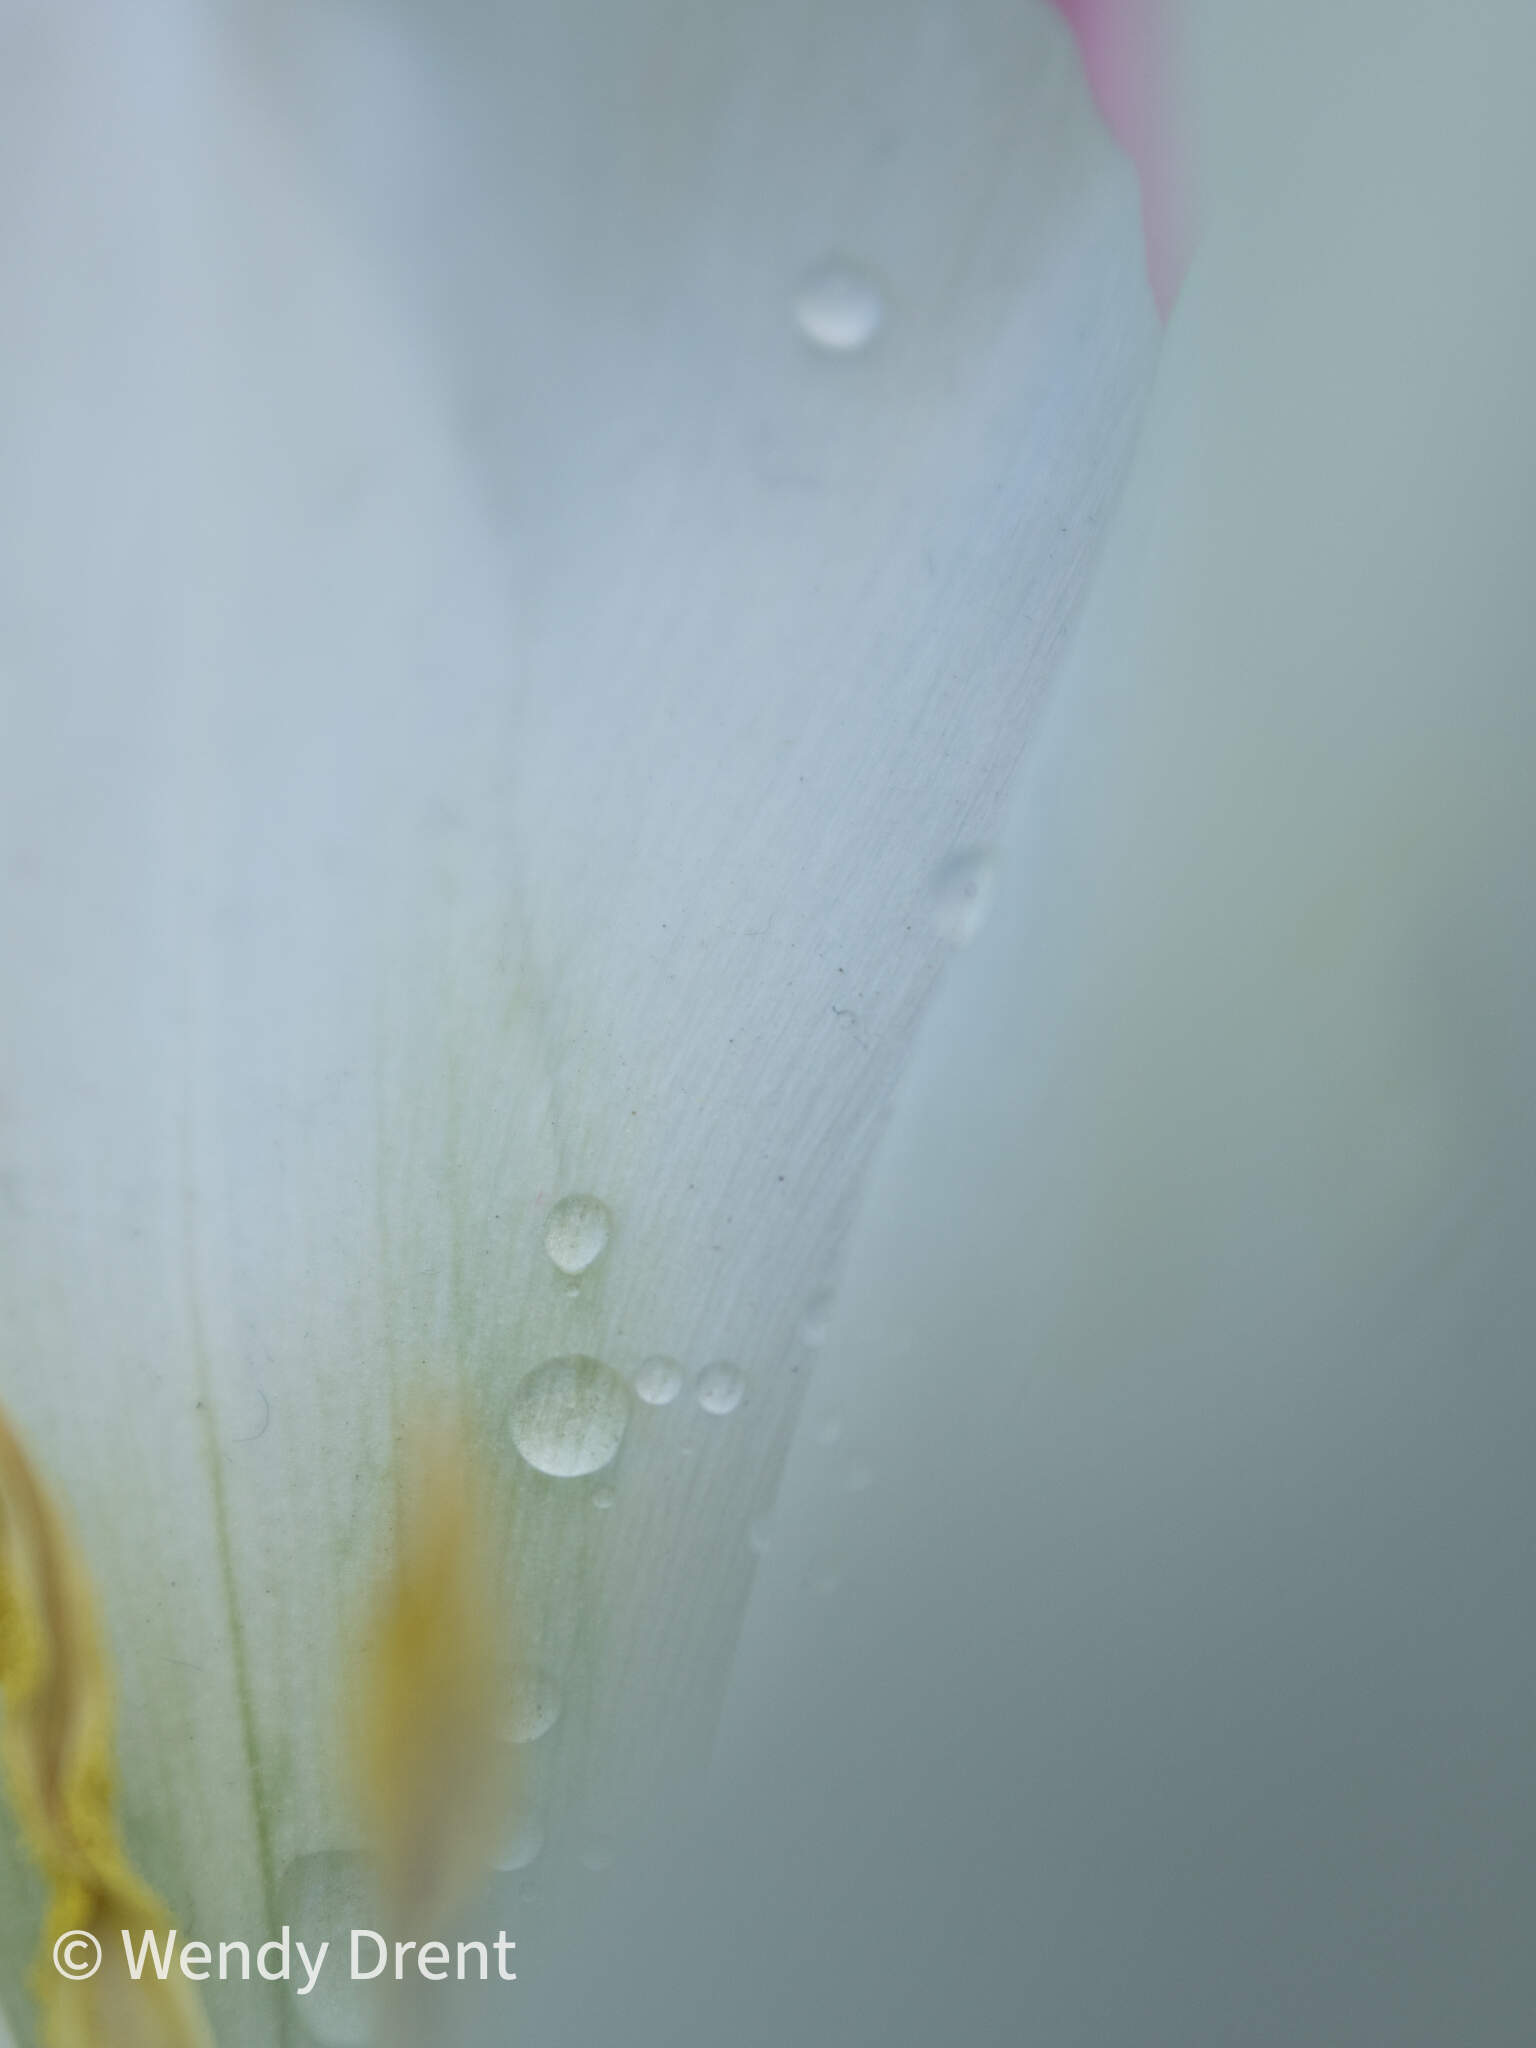 wendydrent, abstract, flower, lensbaby, macro, droplets, close-up, fineartphotography, nature, wendy drent.com